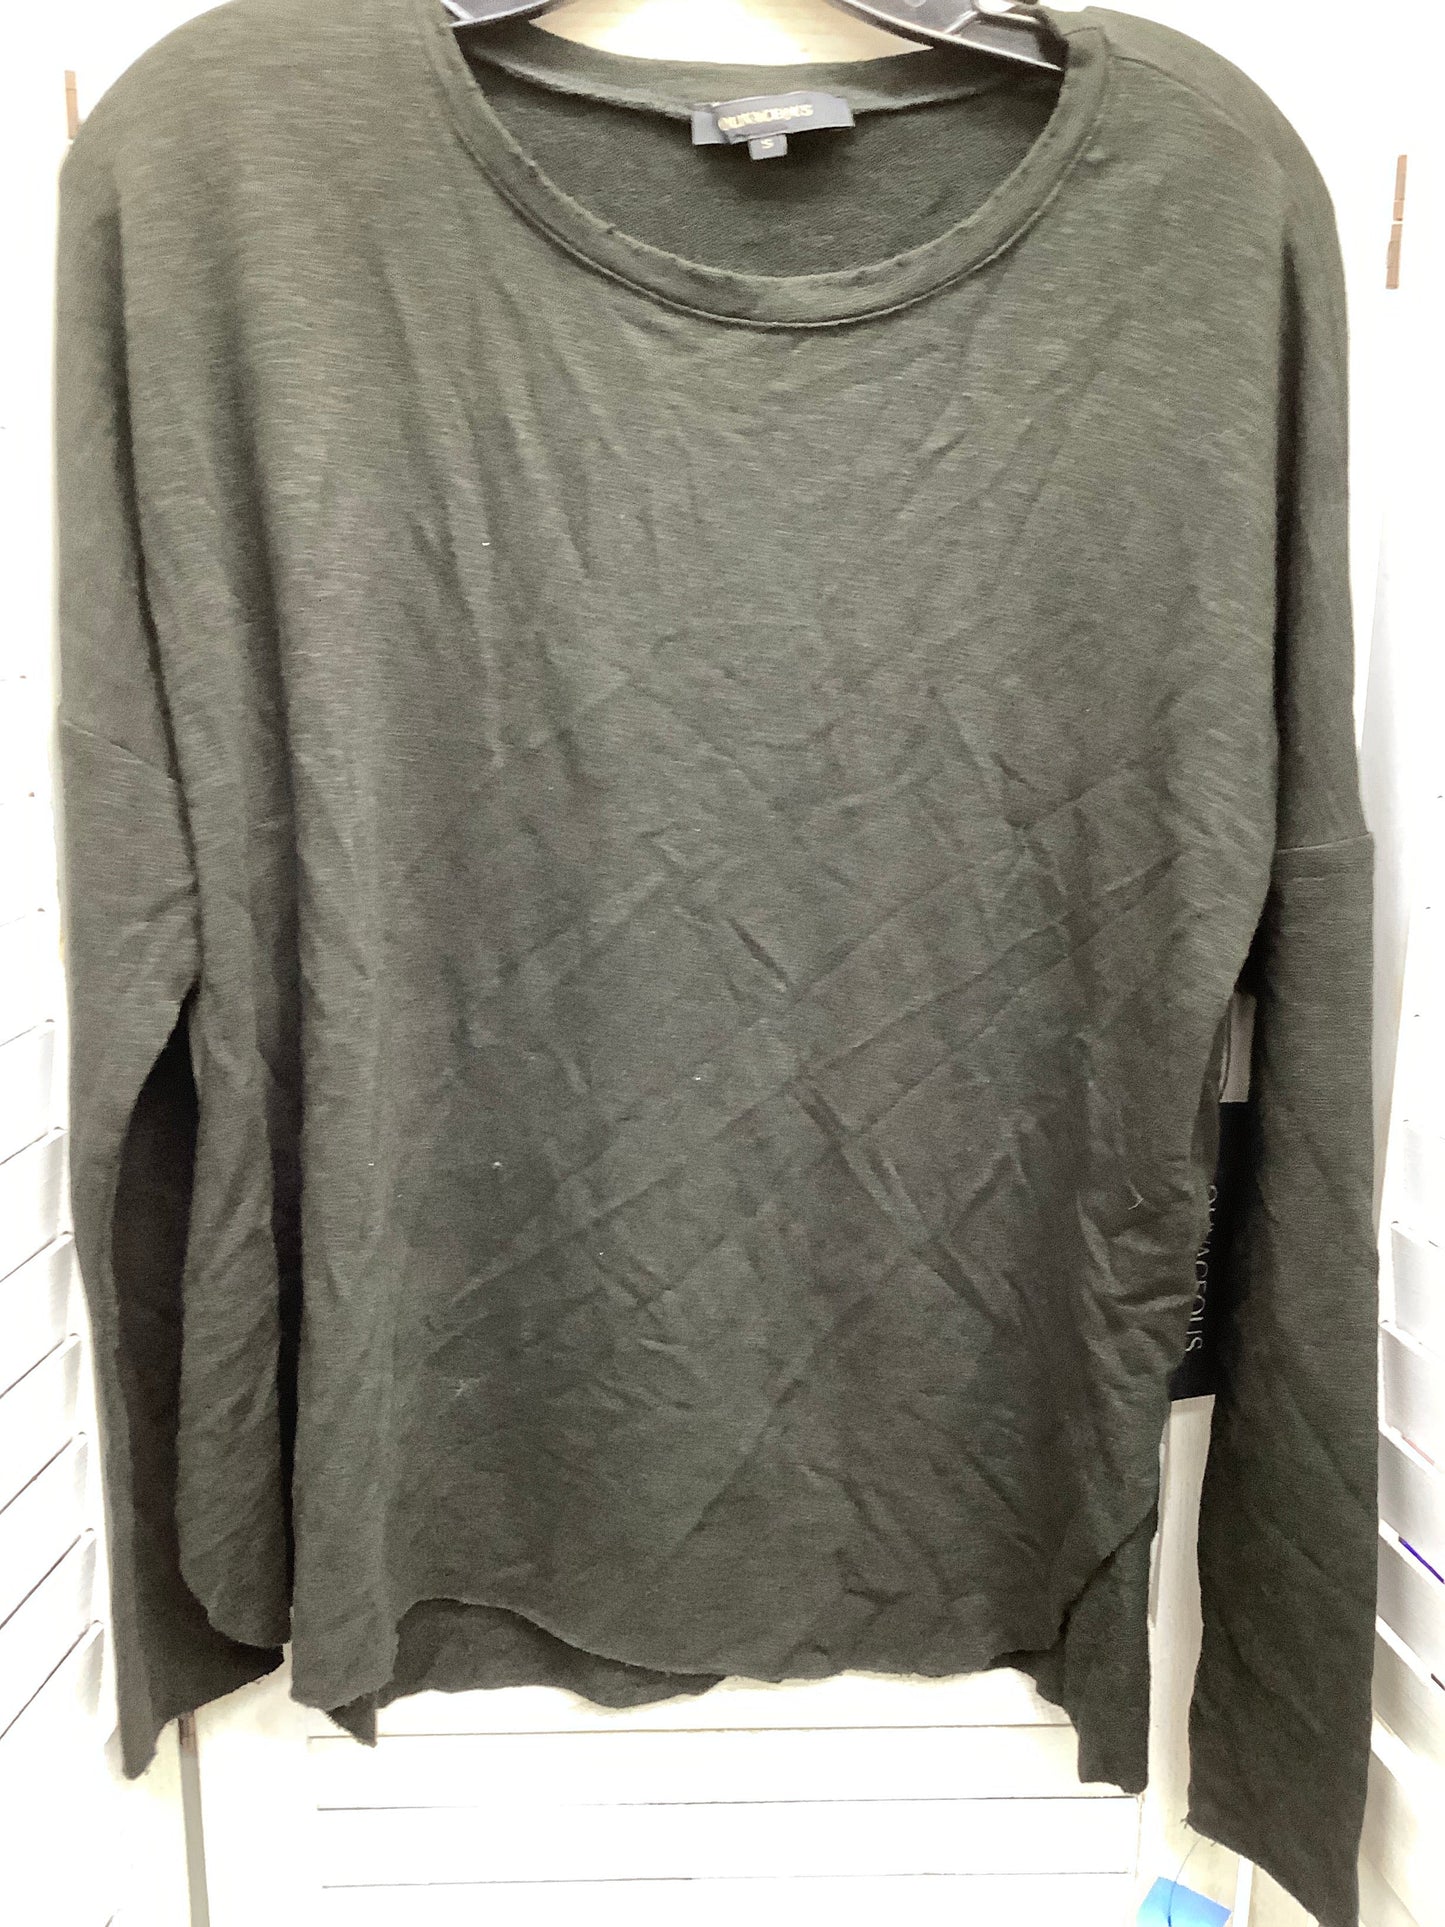 Black Top Long Sleeve Olivaceous, Size S